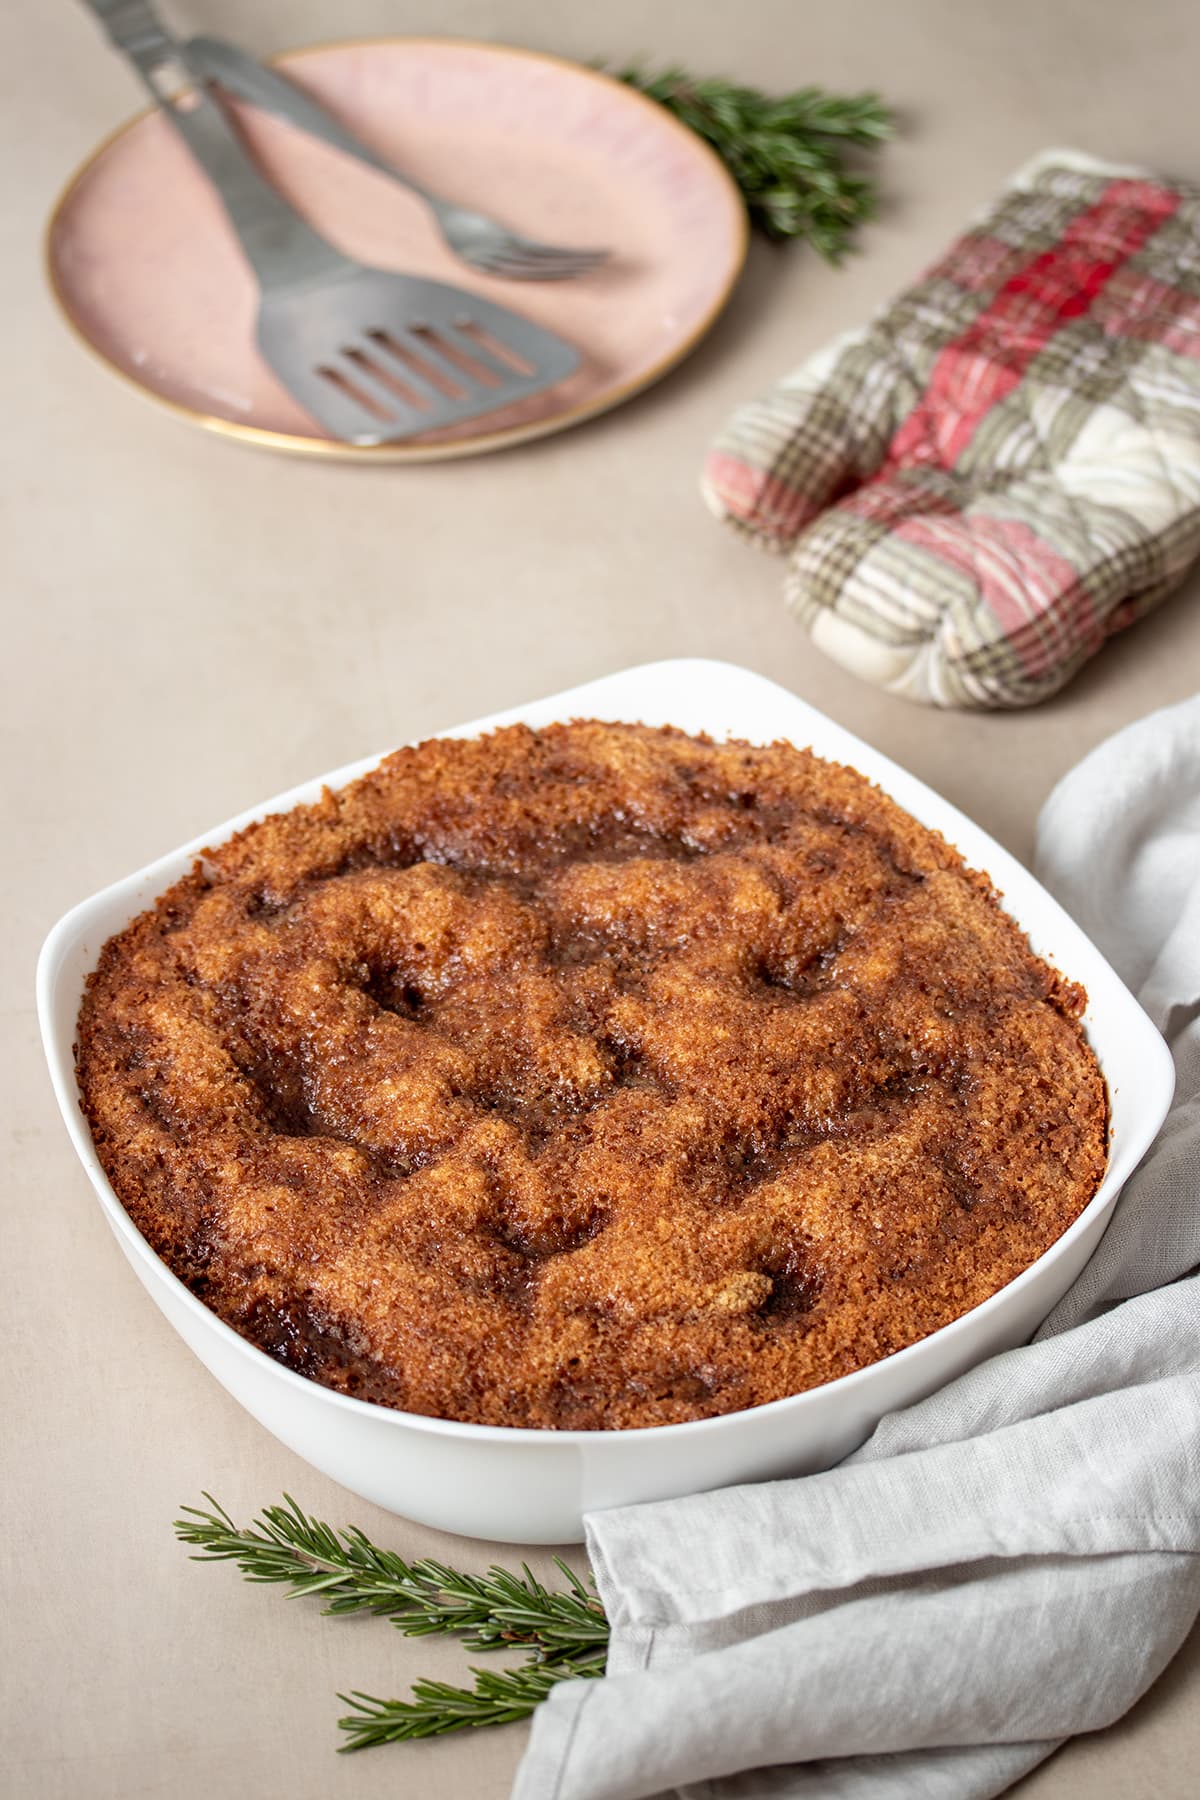 A white baking dish with baked coffee cake and a brown sugar streusel topping on a tan surface with a grey towel.